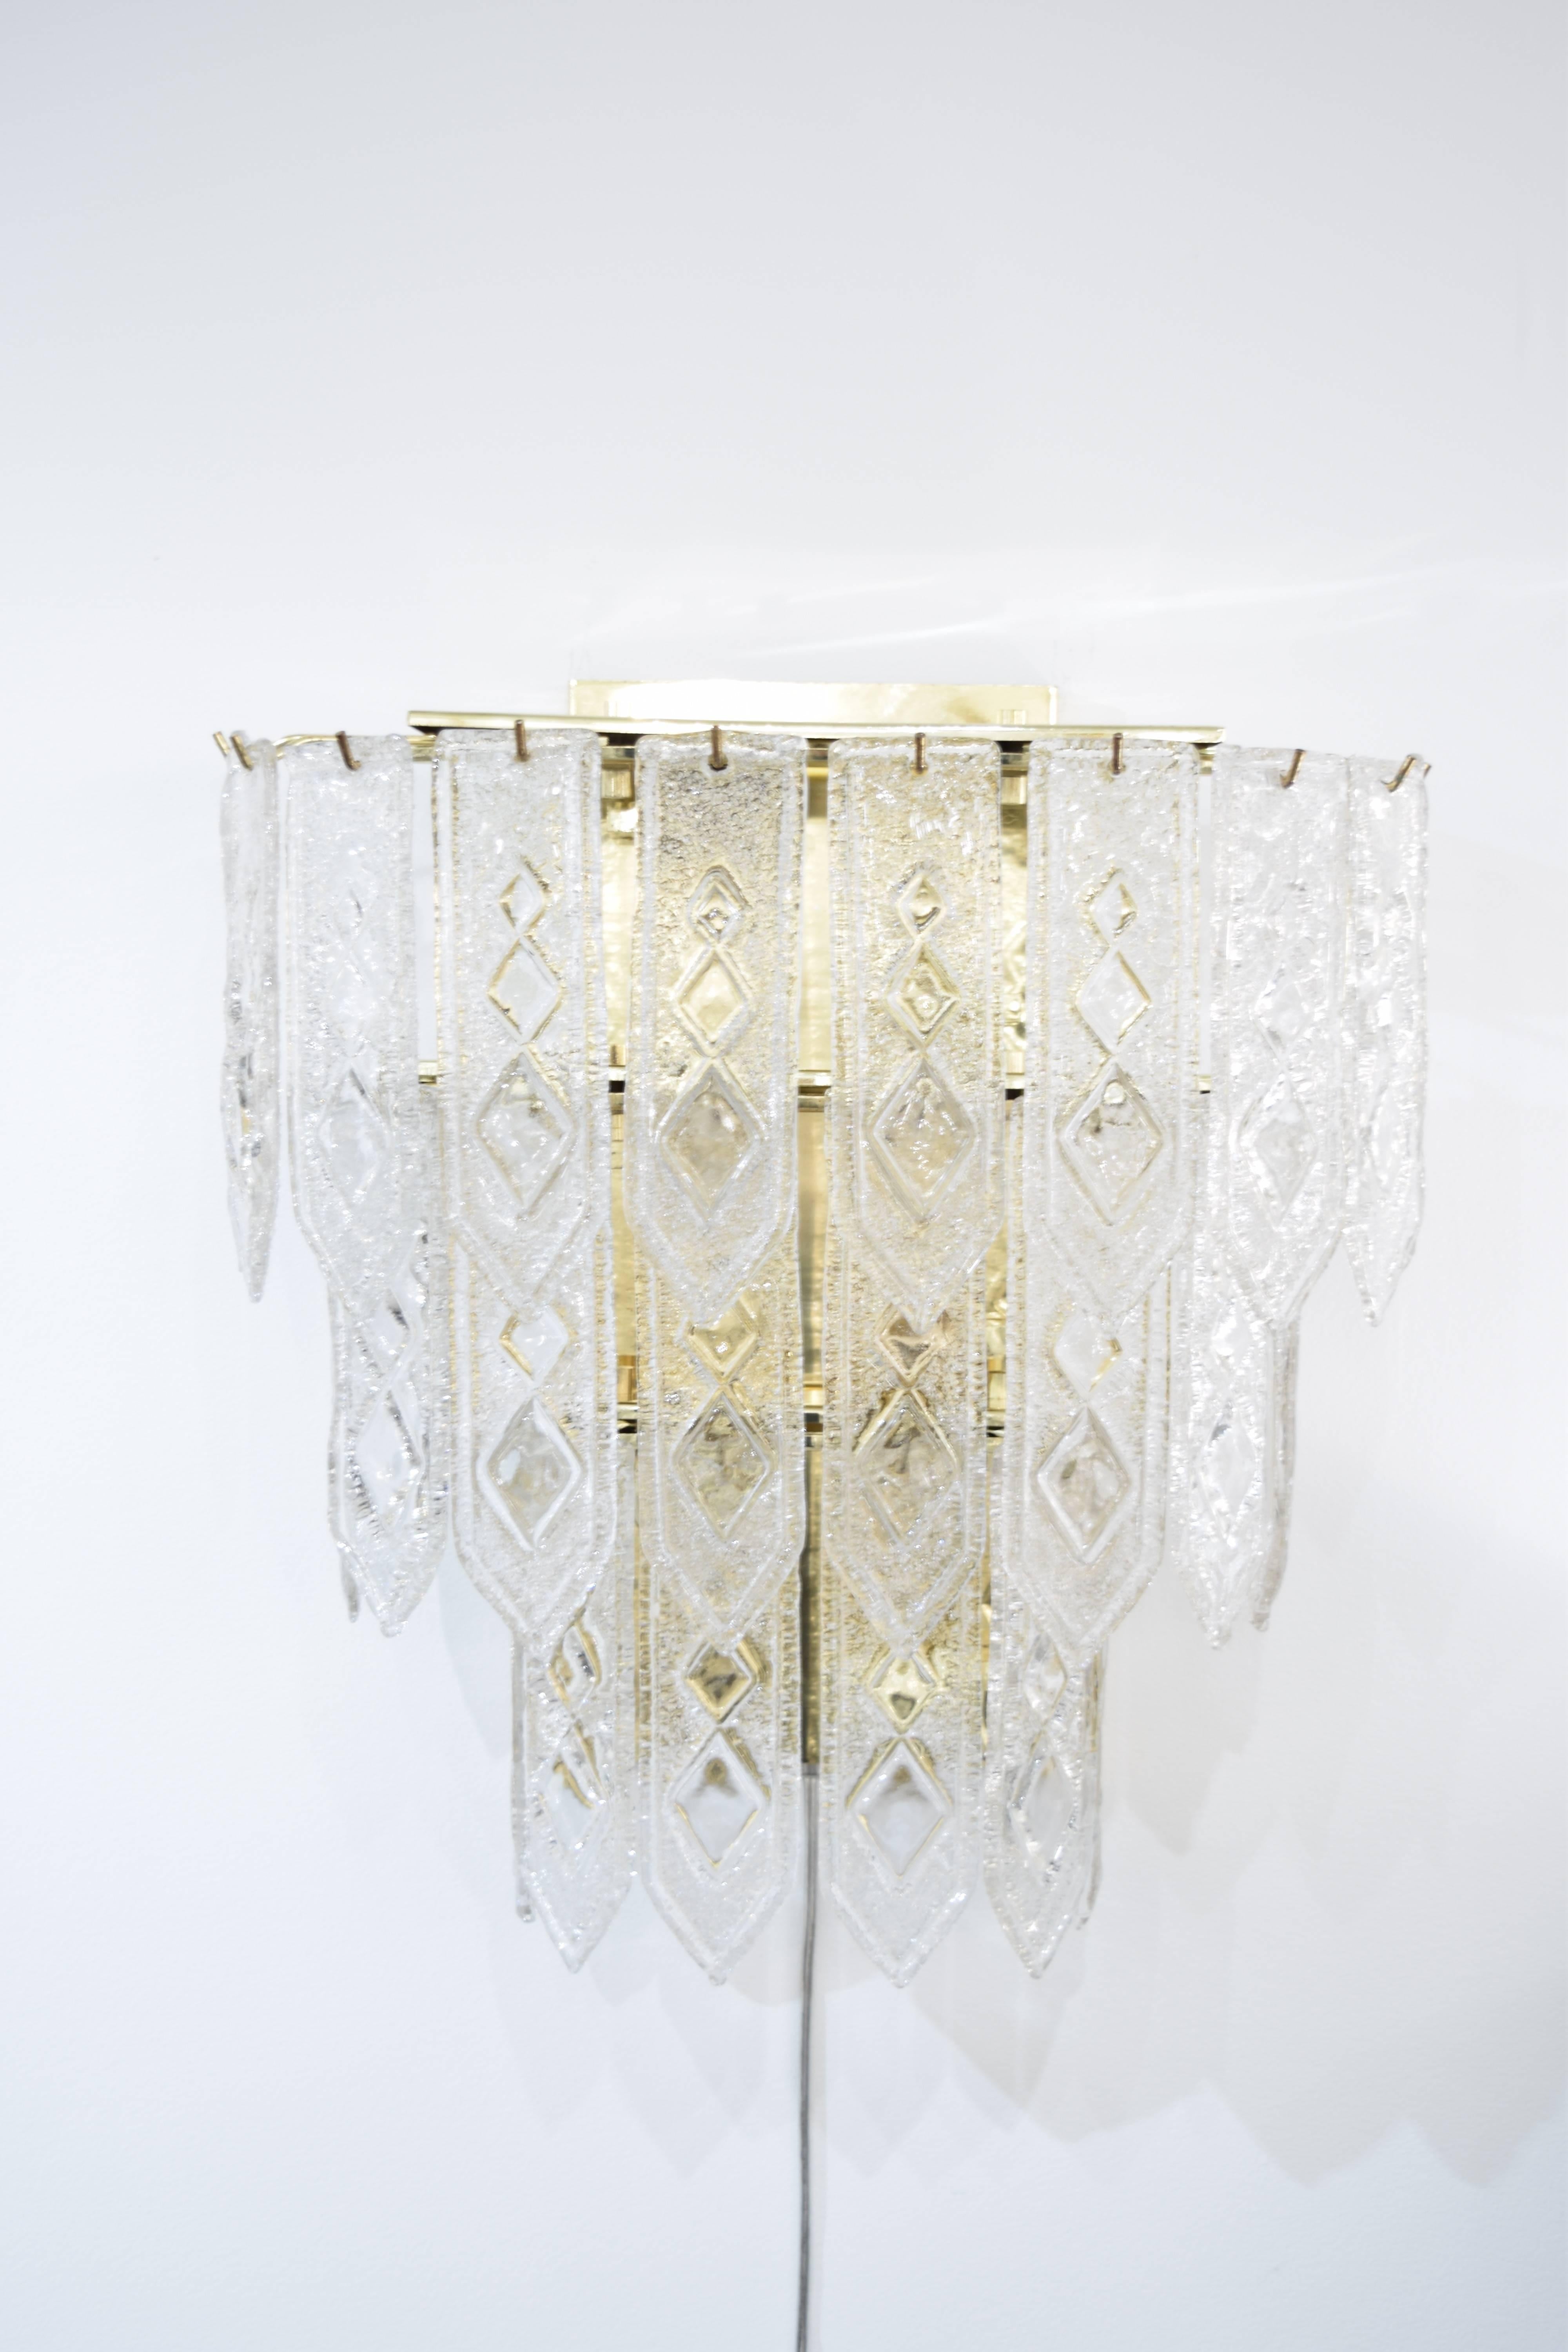 Pair of three-tier blown glass Italian sconces in the style of Venini . Each sconce has 24 crystals that have an Art Deco geometric pattern on them. All crystals in perfect condition. Each sconce holds up to 240 W.